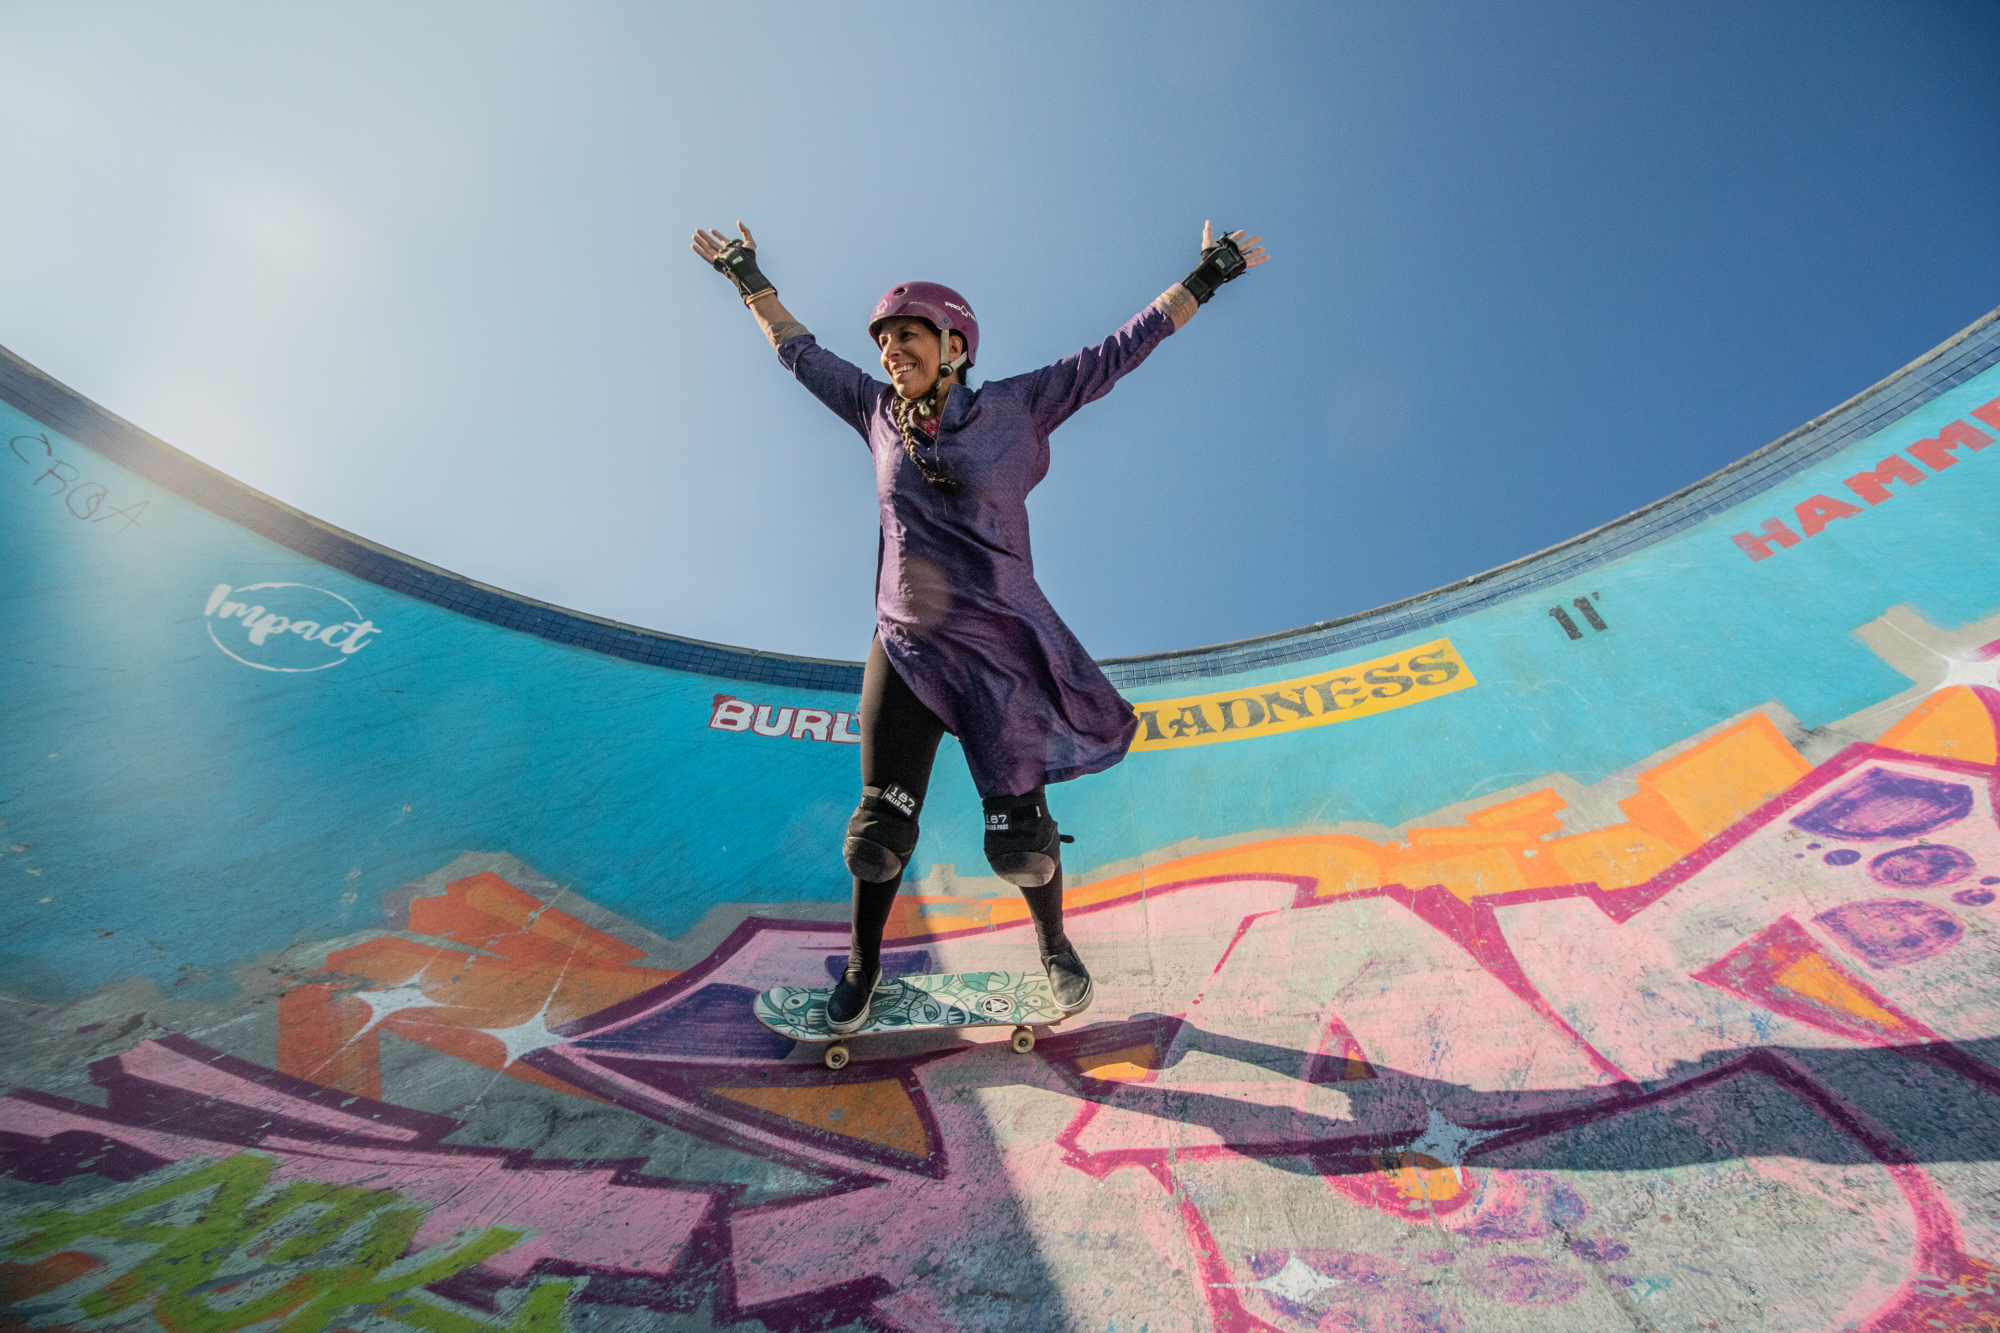 A photo of Roy holding up her arms as she skates inside a half pipe painted in bright colors and graffiti.